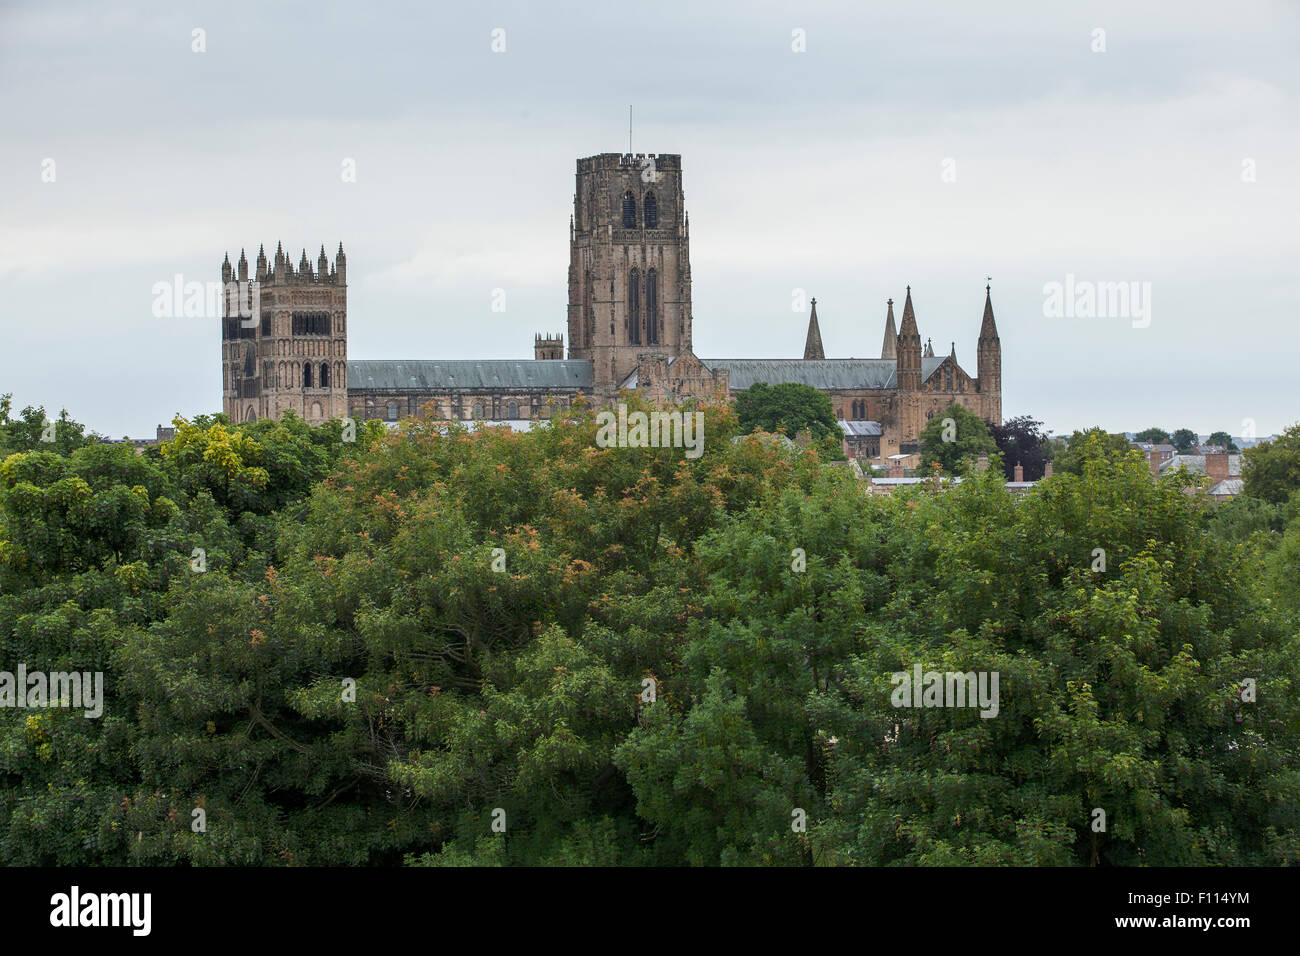 Durham Cathedral and trees. A view from St Aidan's University College outside the city of Durham. Taken with a long lens. Stock Photo